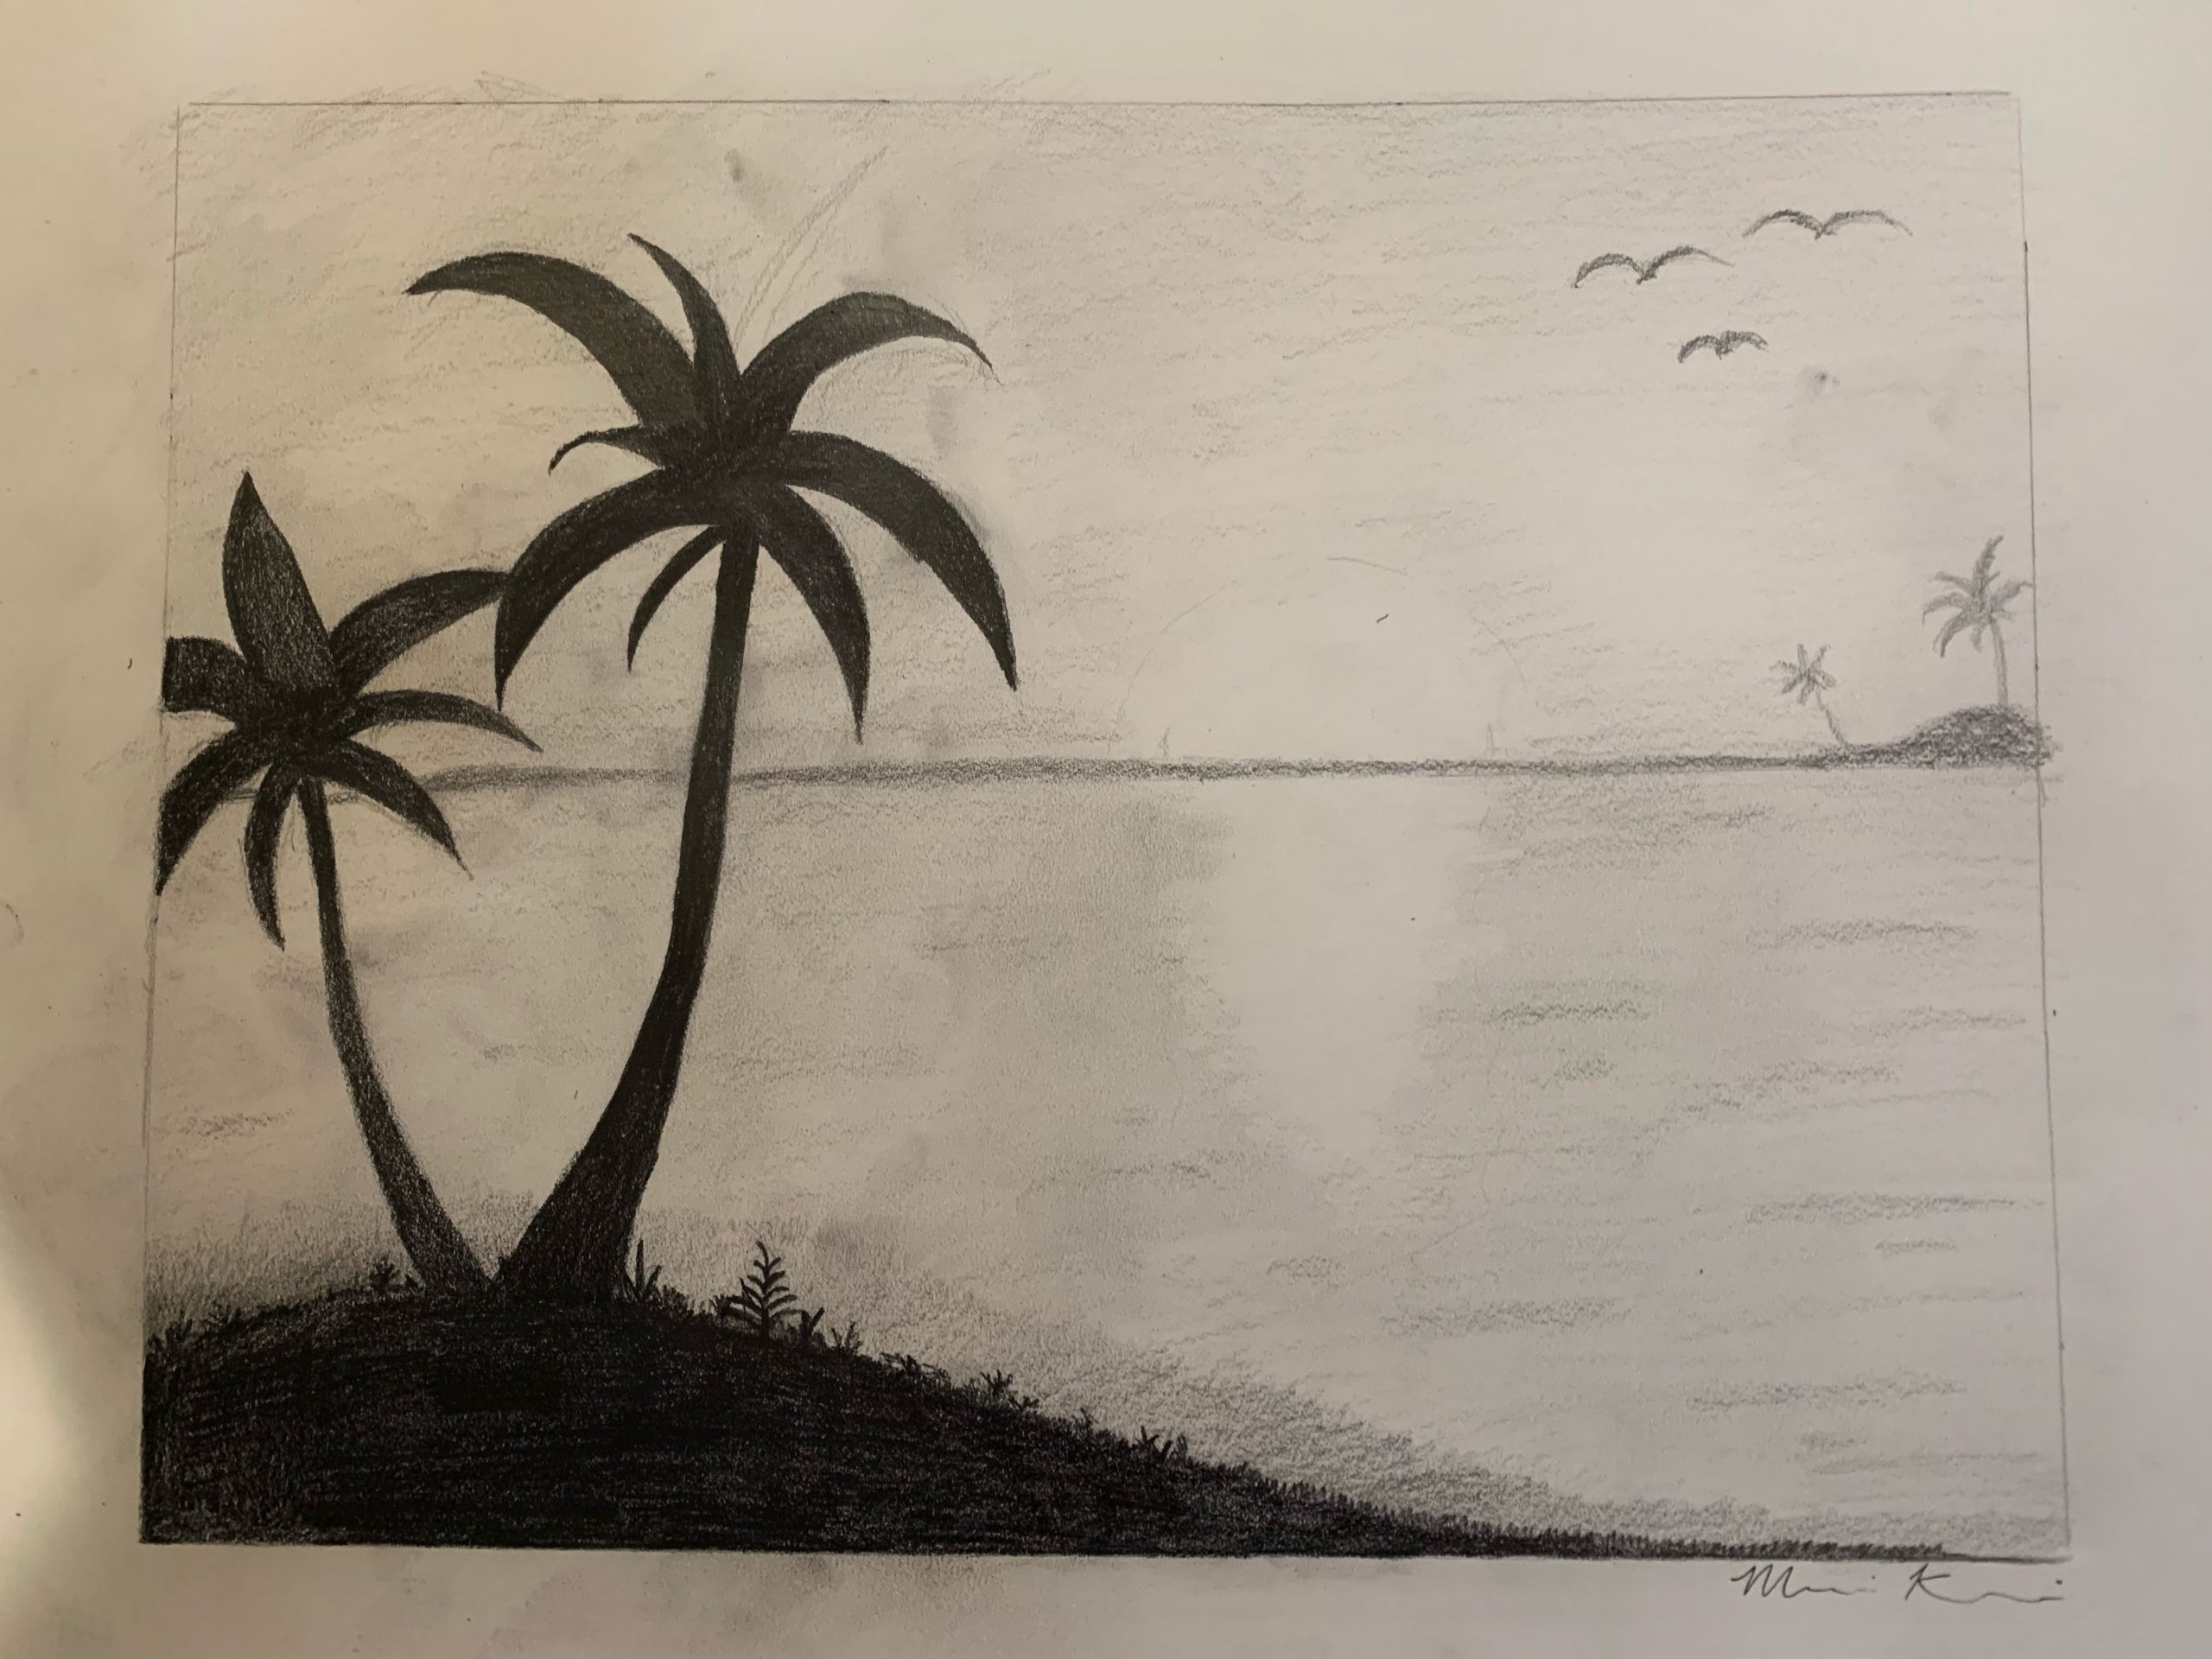 Drawing of palm trees next to water with birds flying overhead